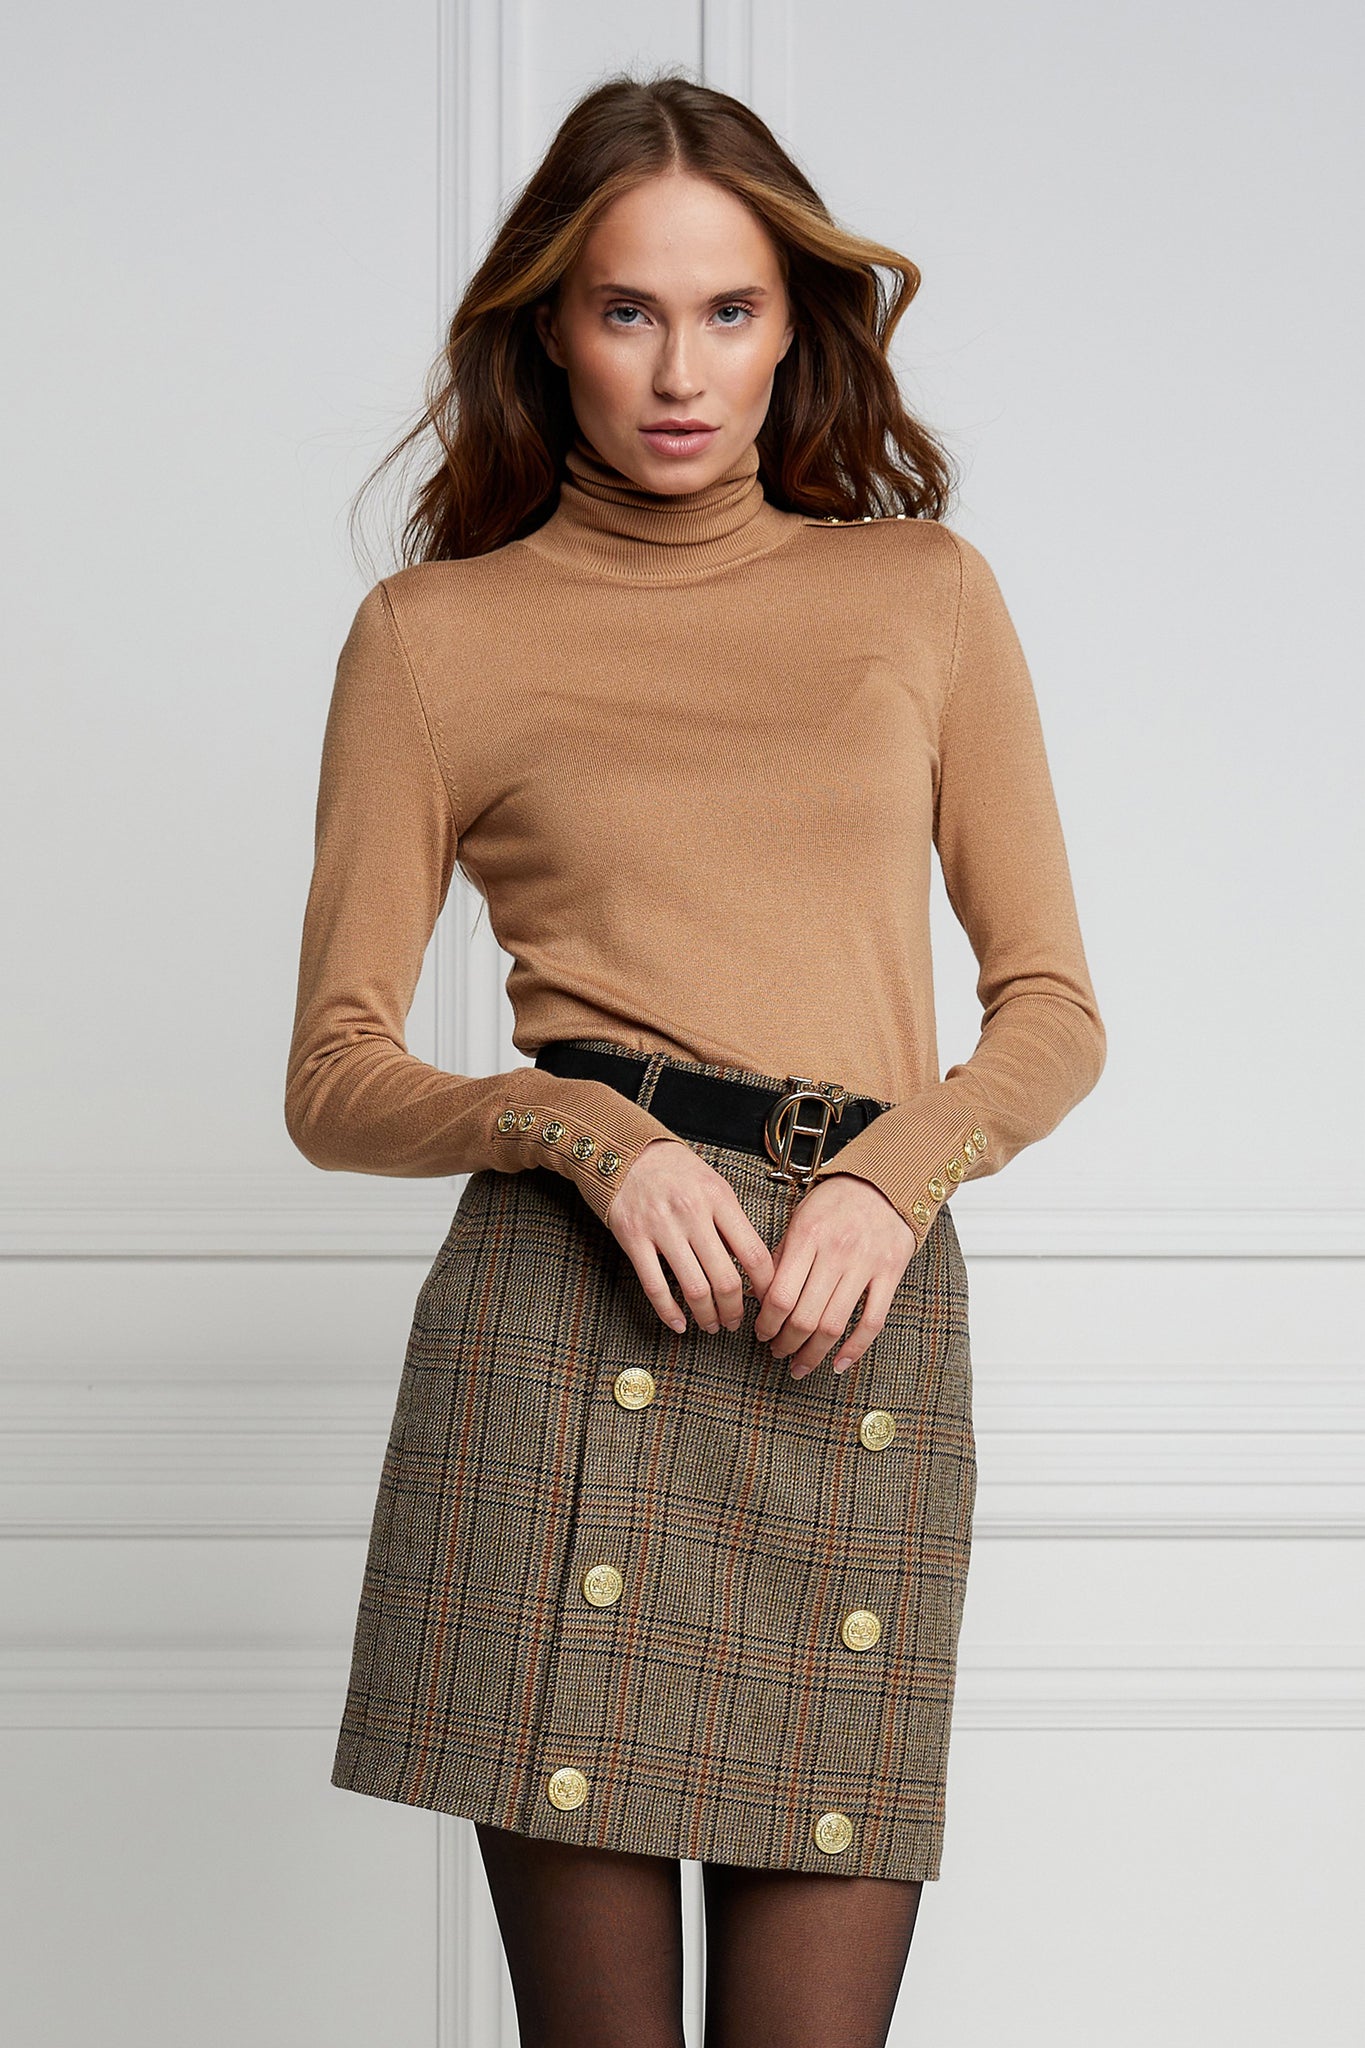 womens wool pencil mini skirt in green and red tweed check with concealed zip fastening on centre back and gold rivets down front